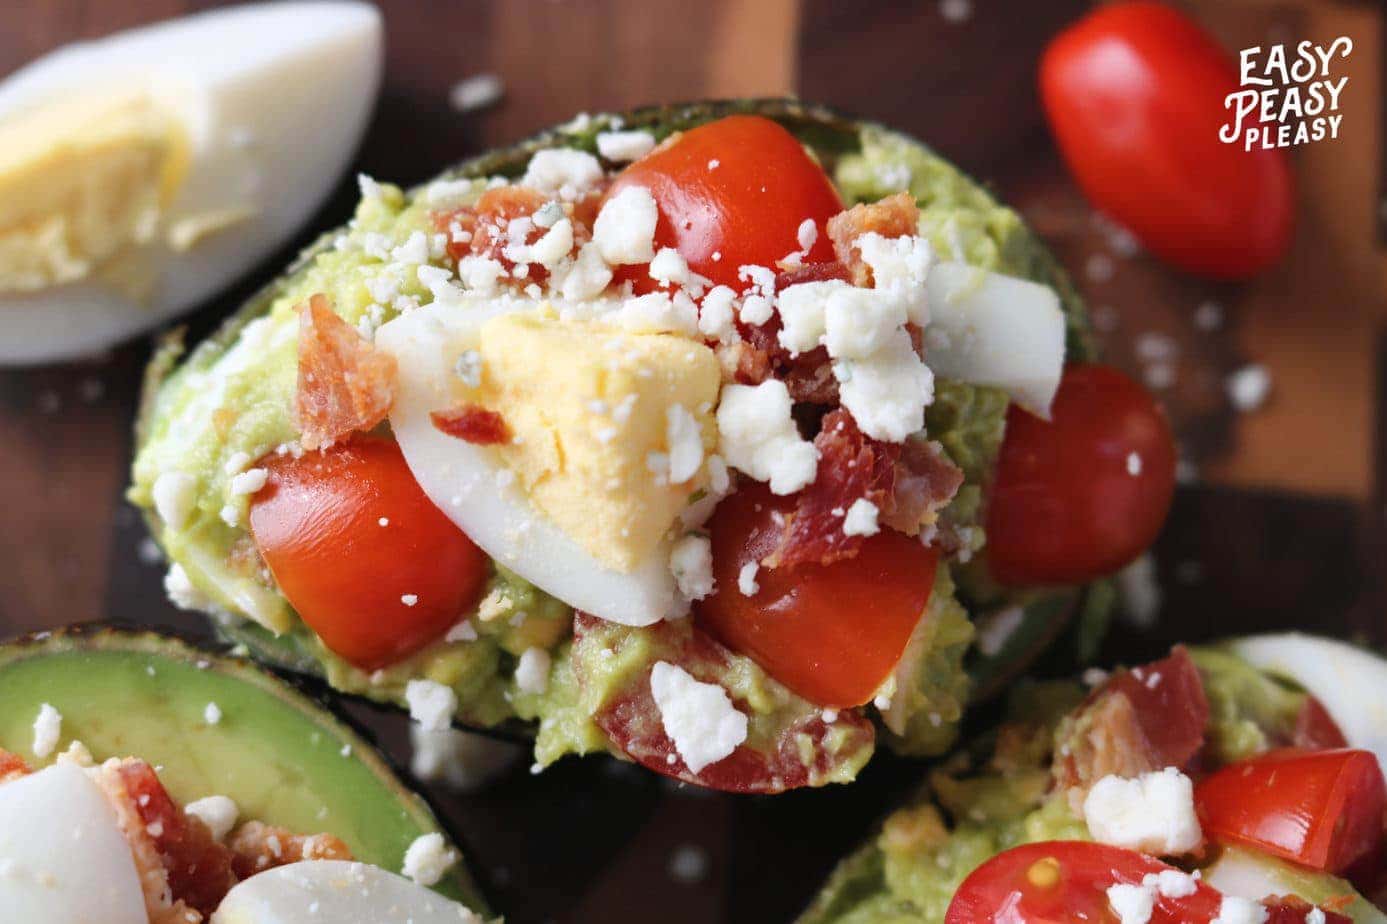 https://easypeasypleasy.com/wp-content/uploads/2020/04/Avocados-stuffed-with-Cobb-Salad-ingredients-is-the-perfect-recipe-to-use-up-hard-boiled-eggs.-scaled.jpg